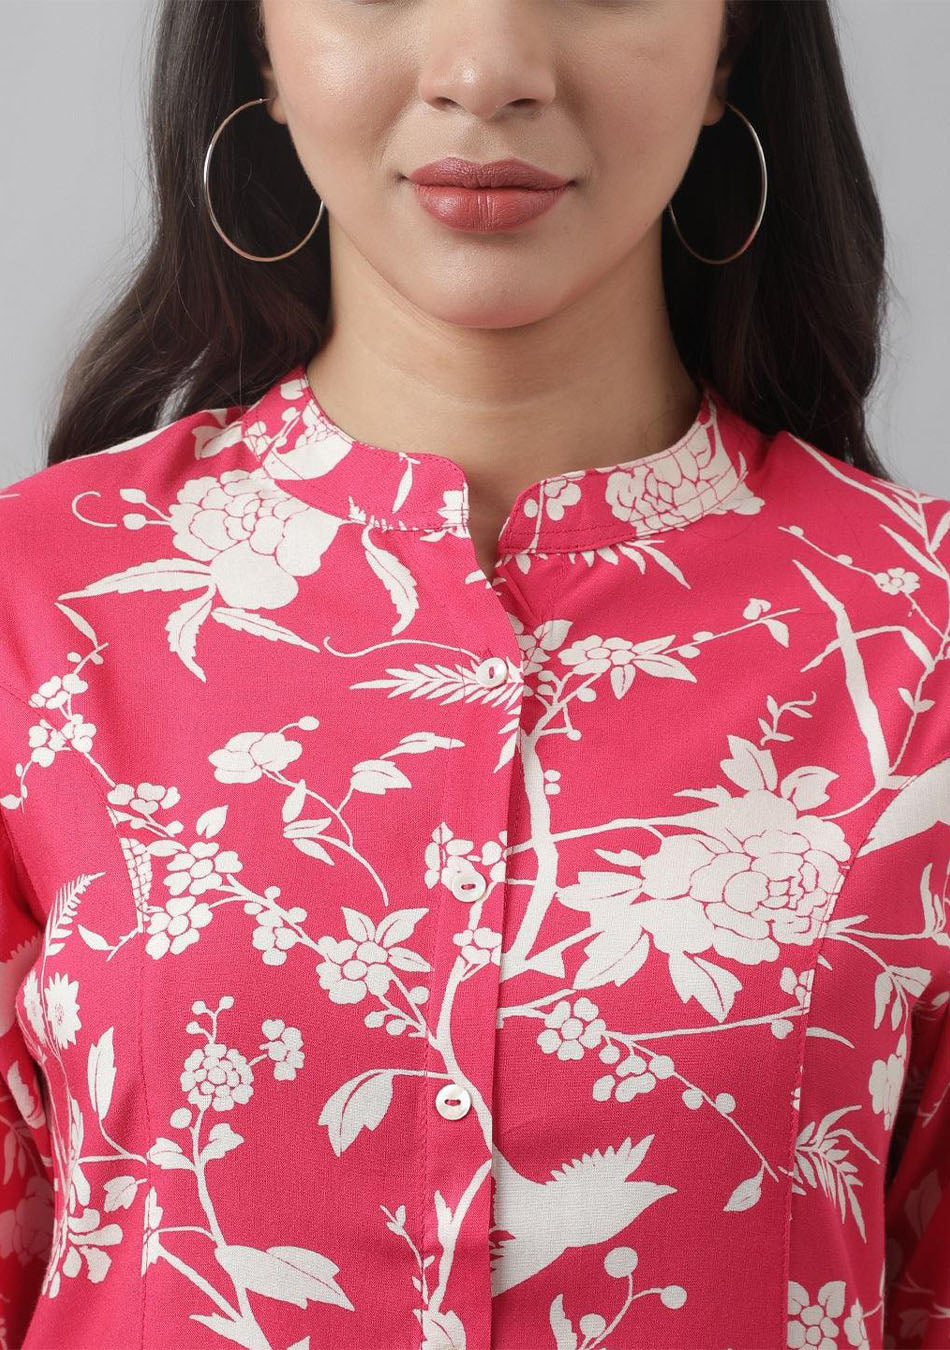 Hot Pink Floral Printed Rayon A-line Shirt Style Top